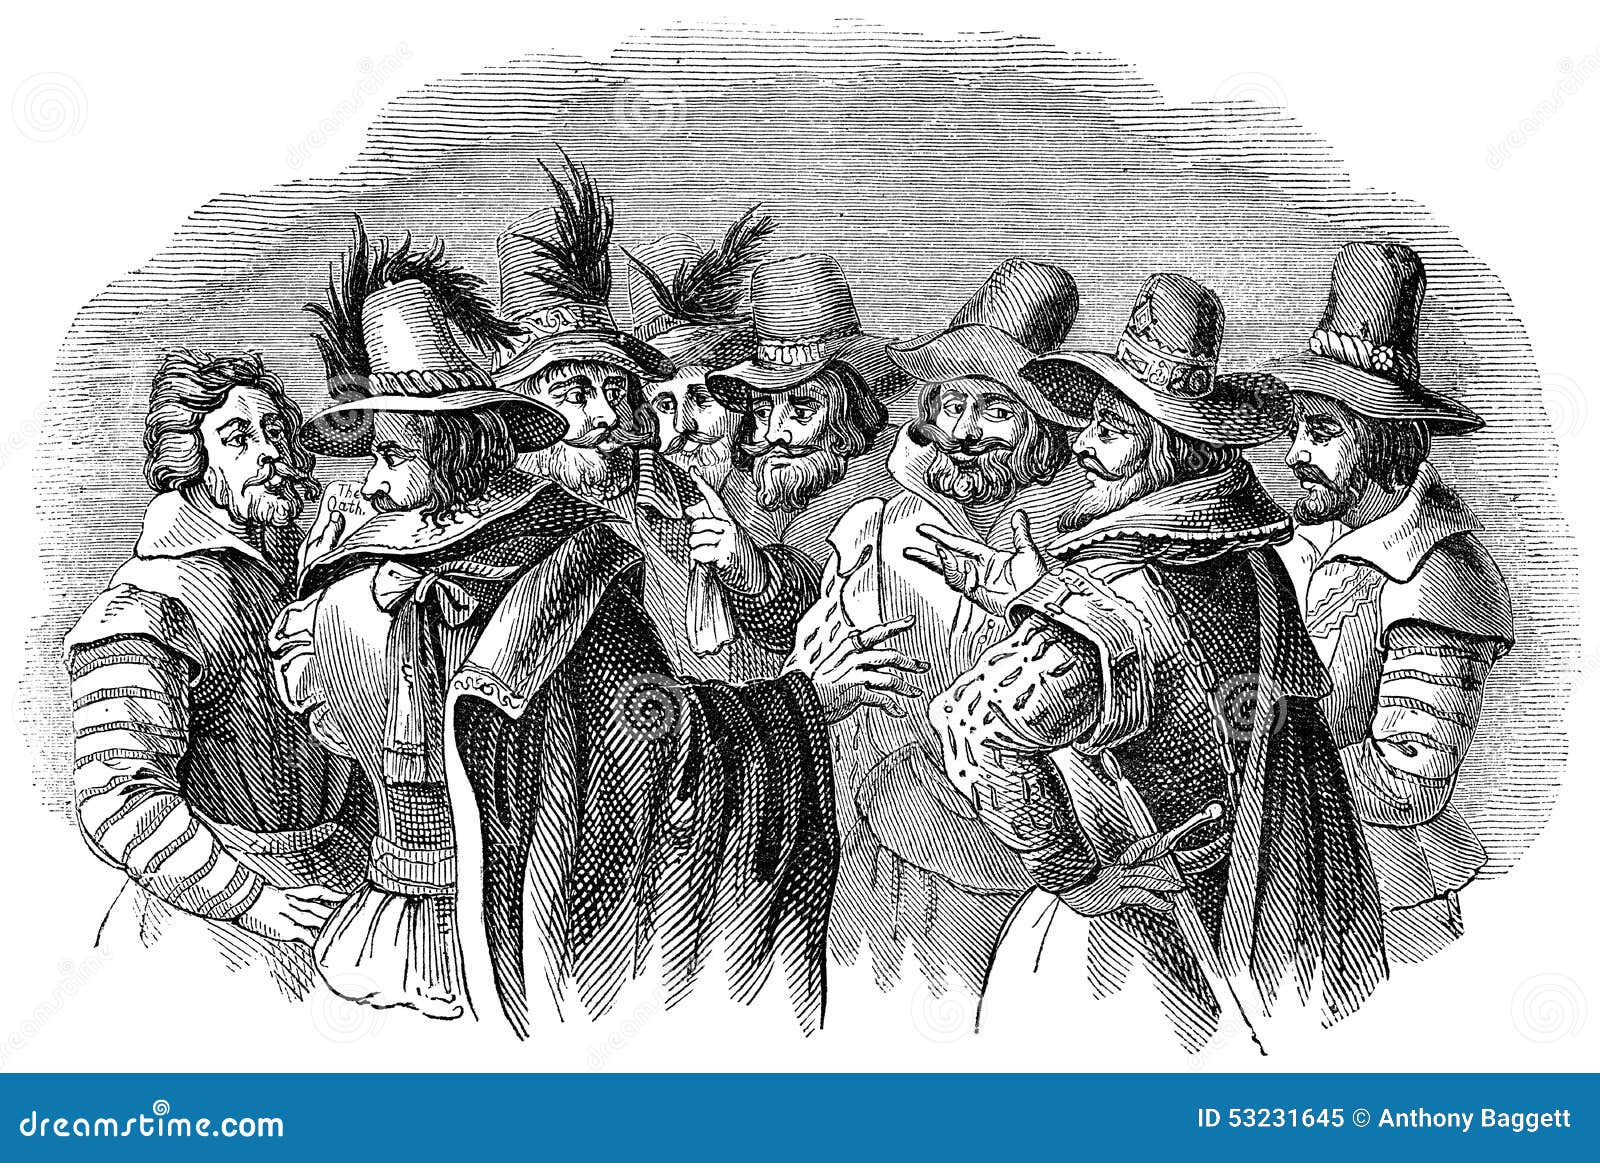 guy fawkes and his fellow conspirators